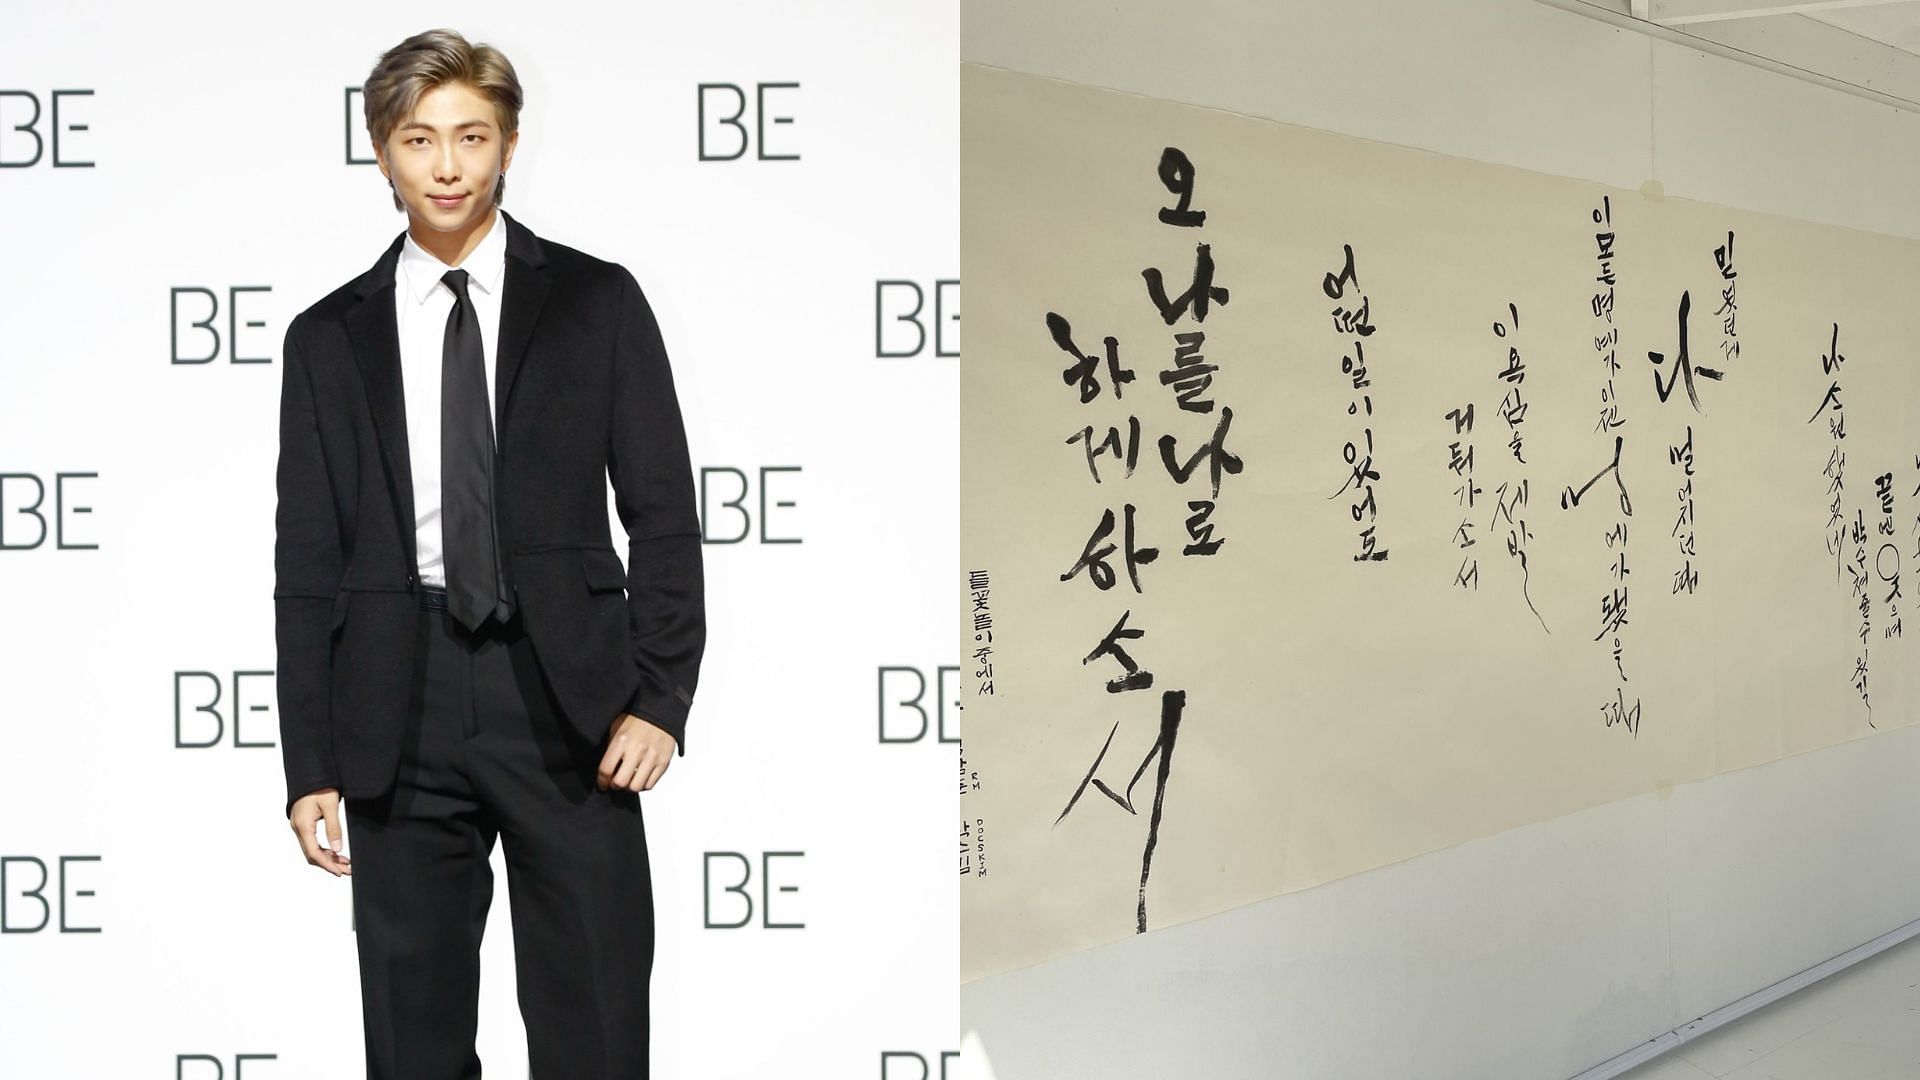 RM achieves a personal record (Images via Twitter/joonfanpage and miraigal7)